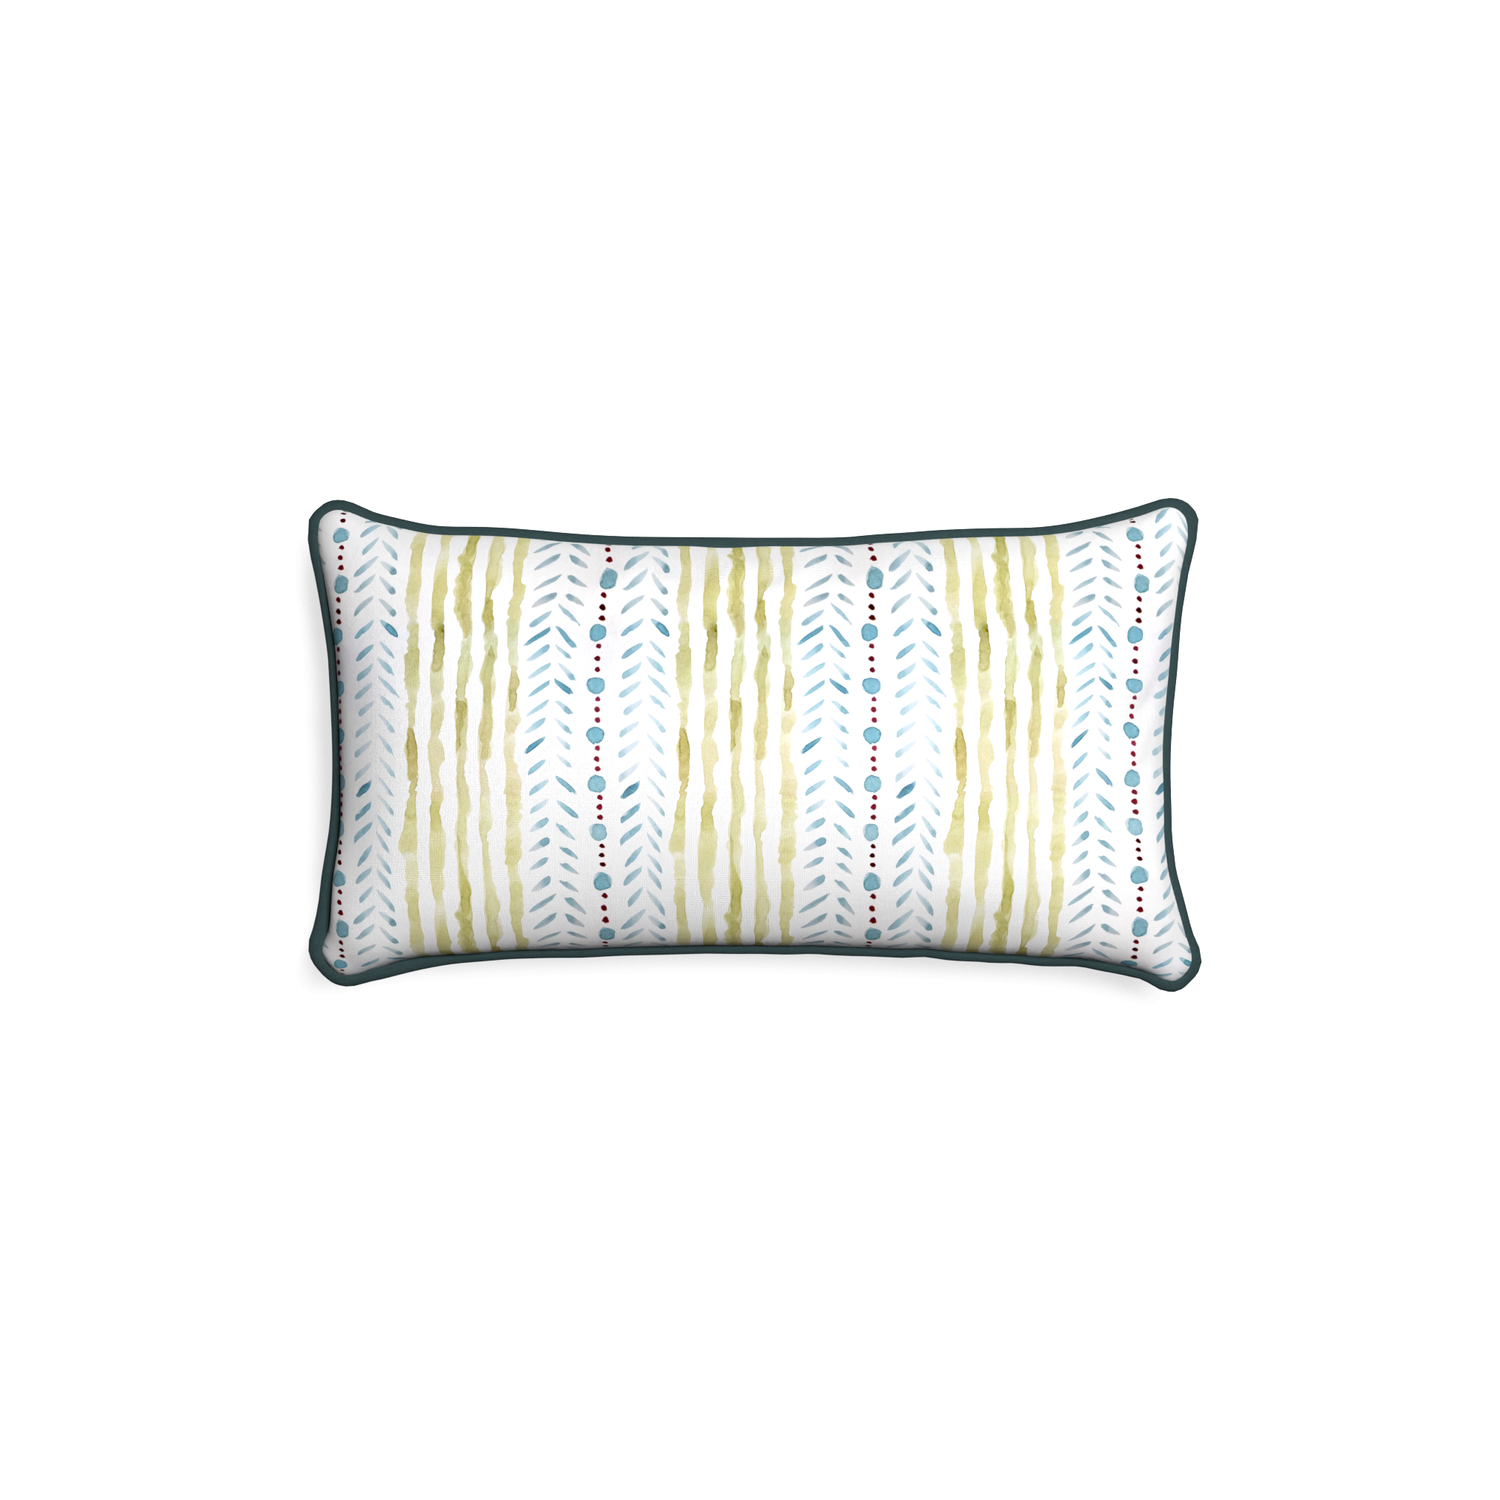 Petite-lumbar julia custom blue & green stripedpillow with p piping on white background